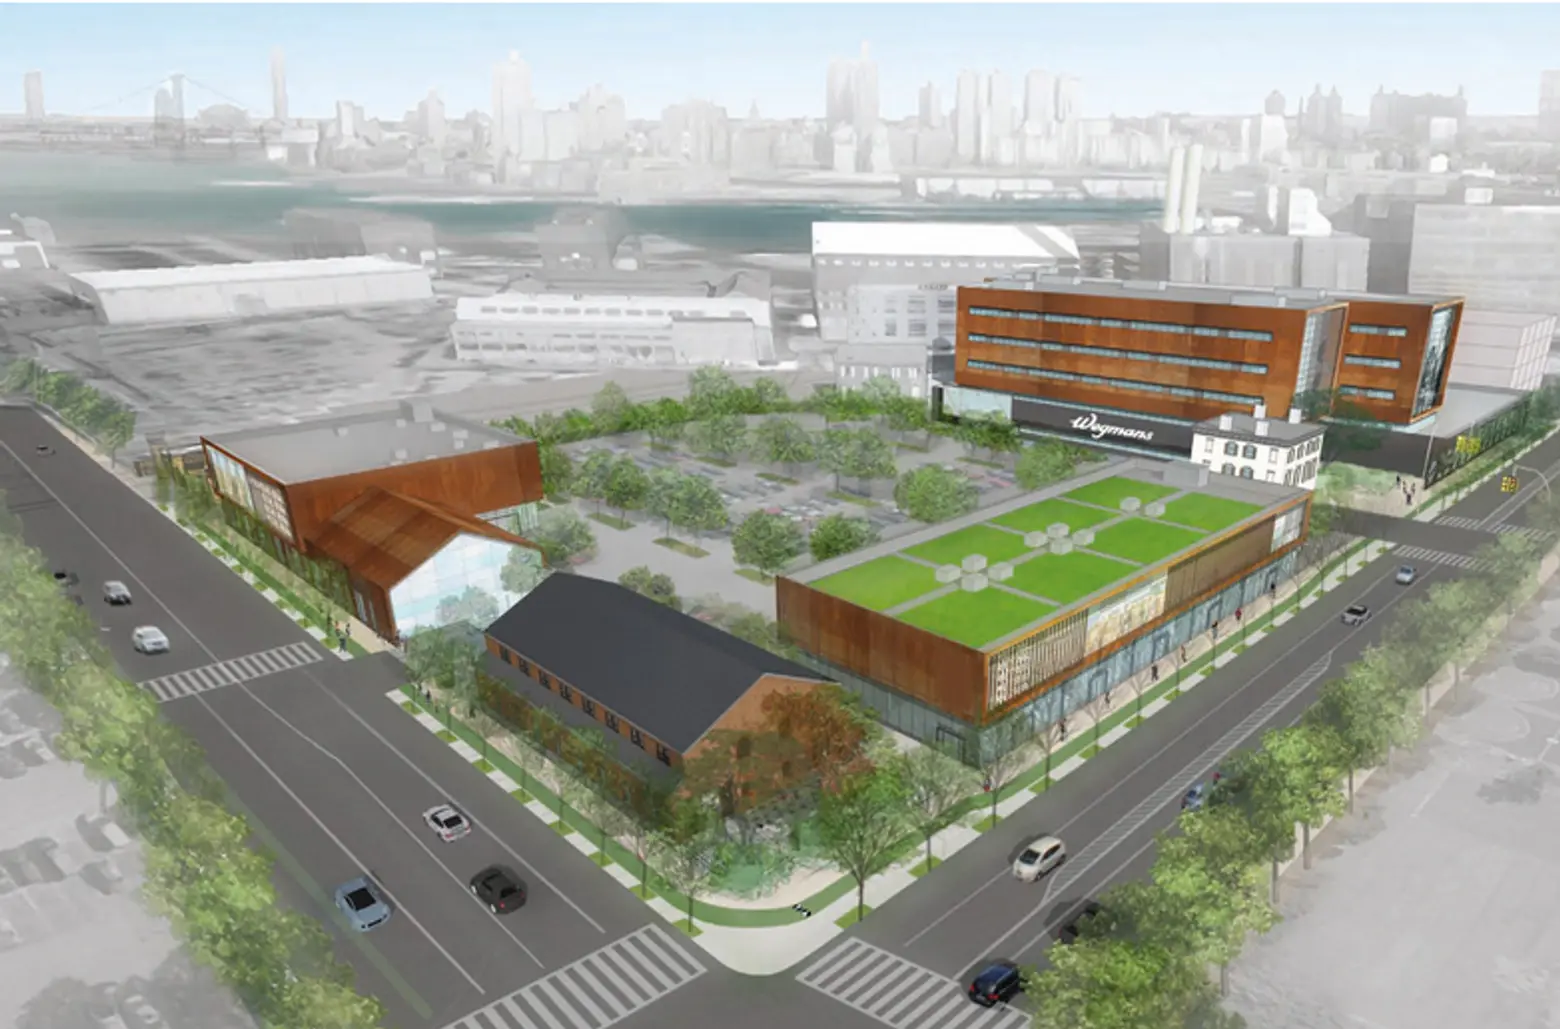 Move It Whole Foods, Brooklyn Is Getting a Wegmans!